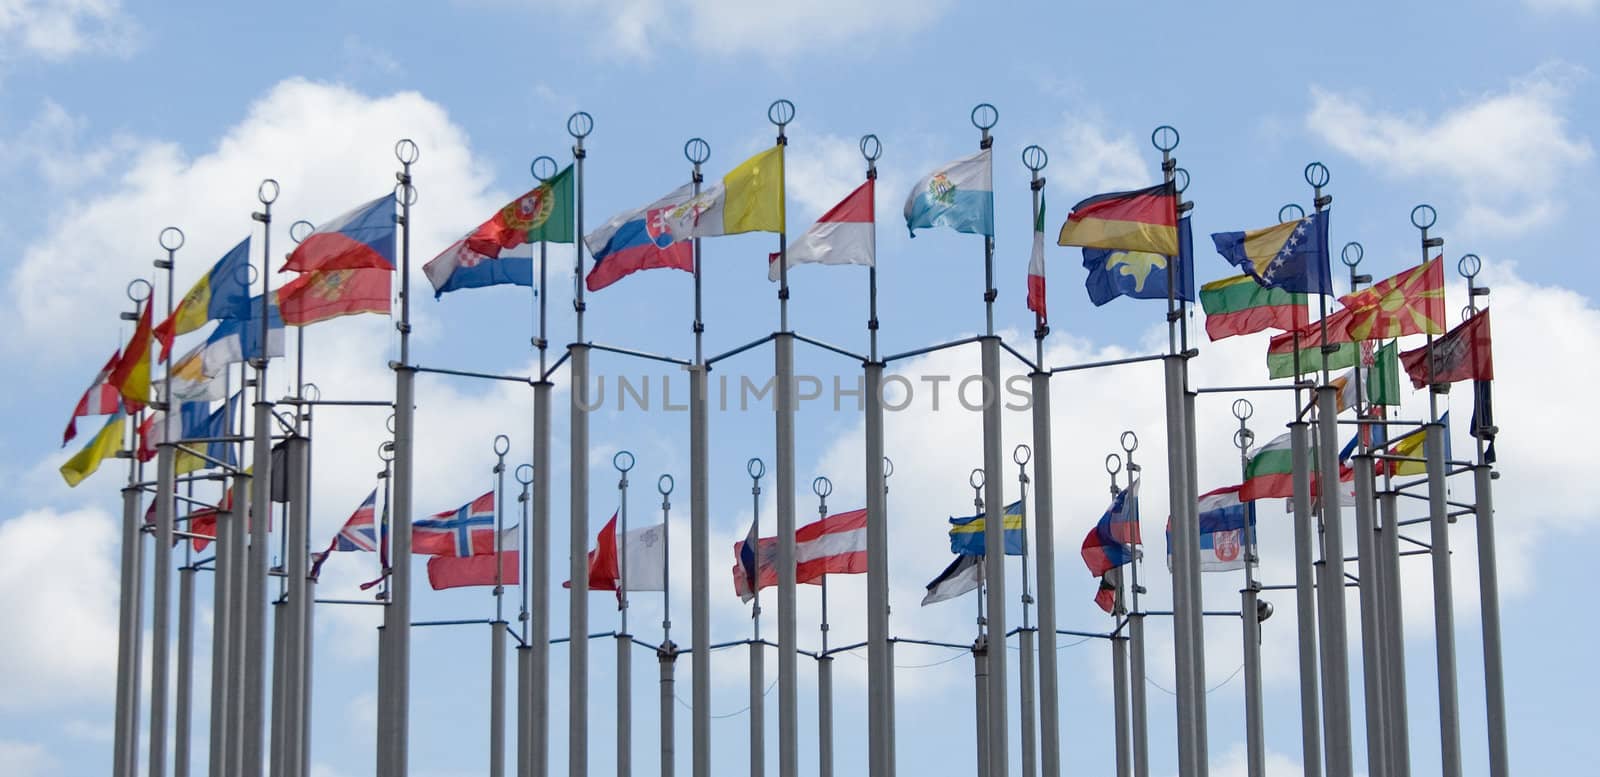 flags of different countries on cloudy blue sky background